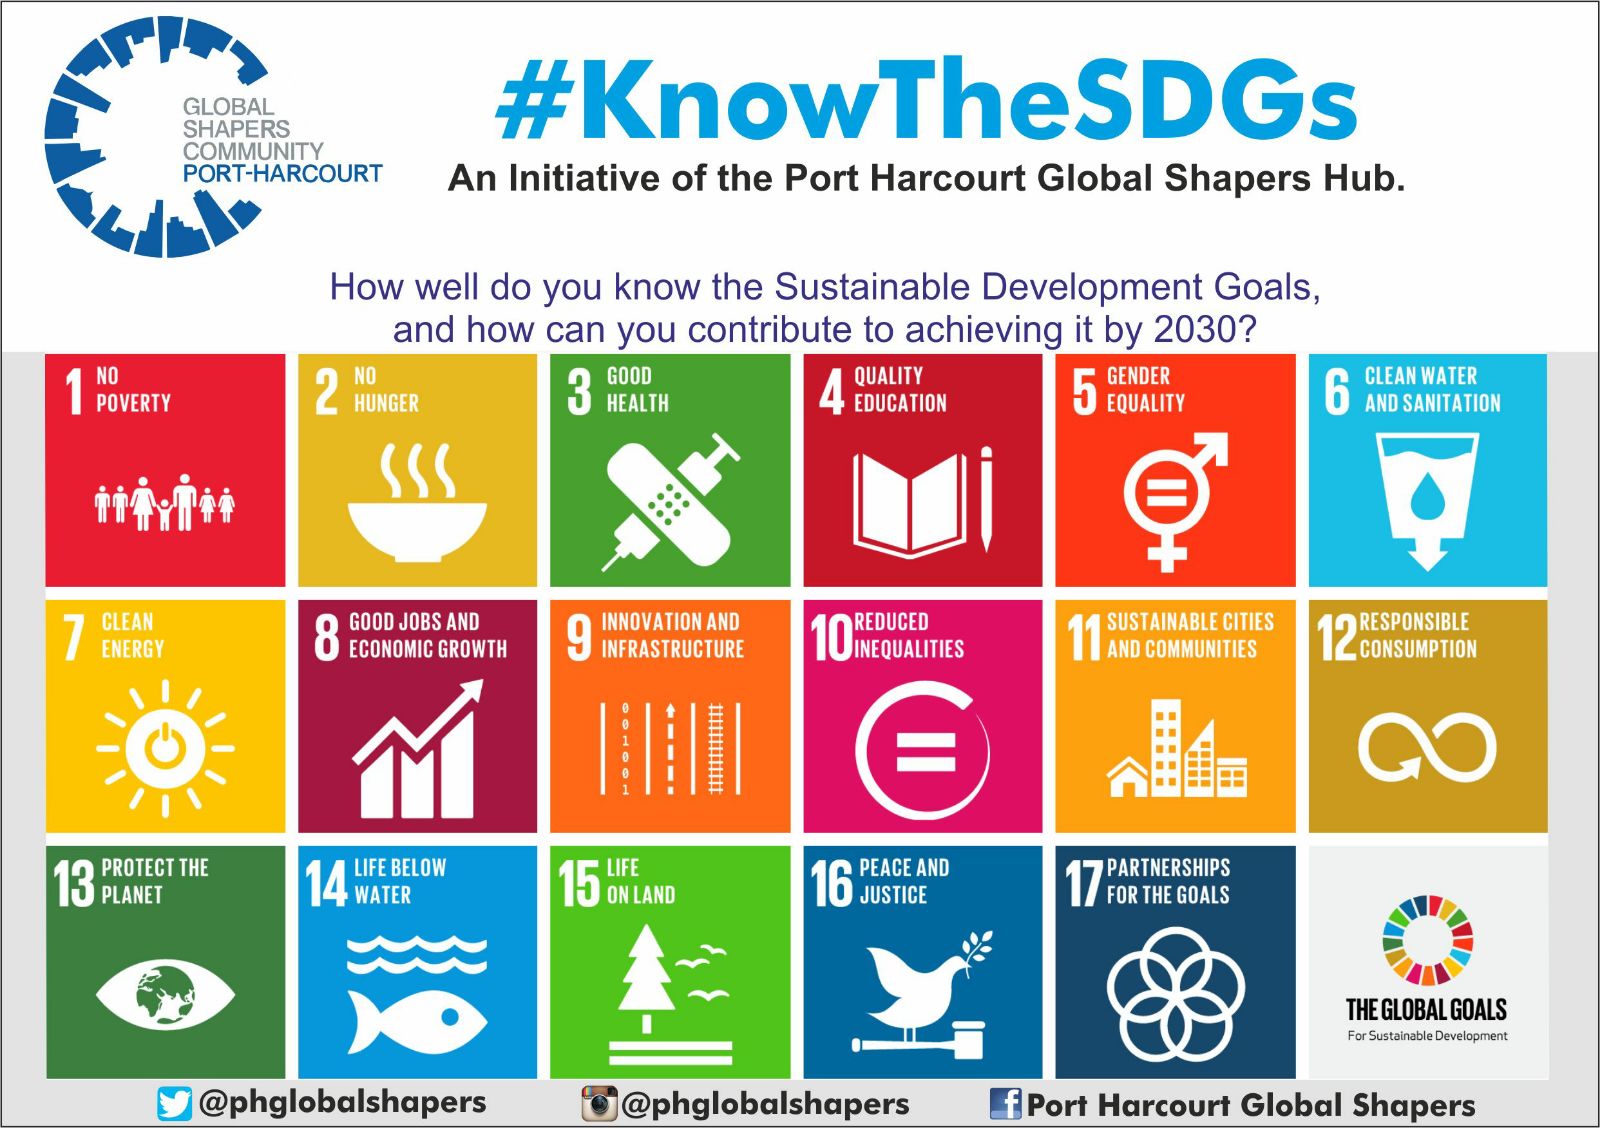 #KnowtheSDGs Campaign